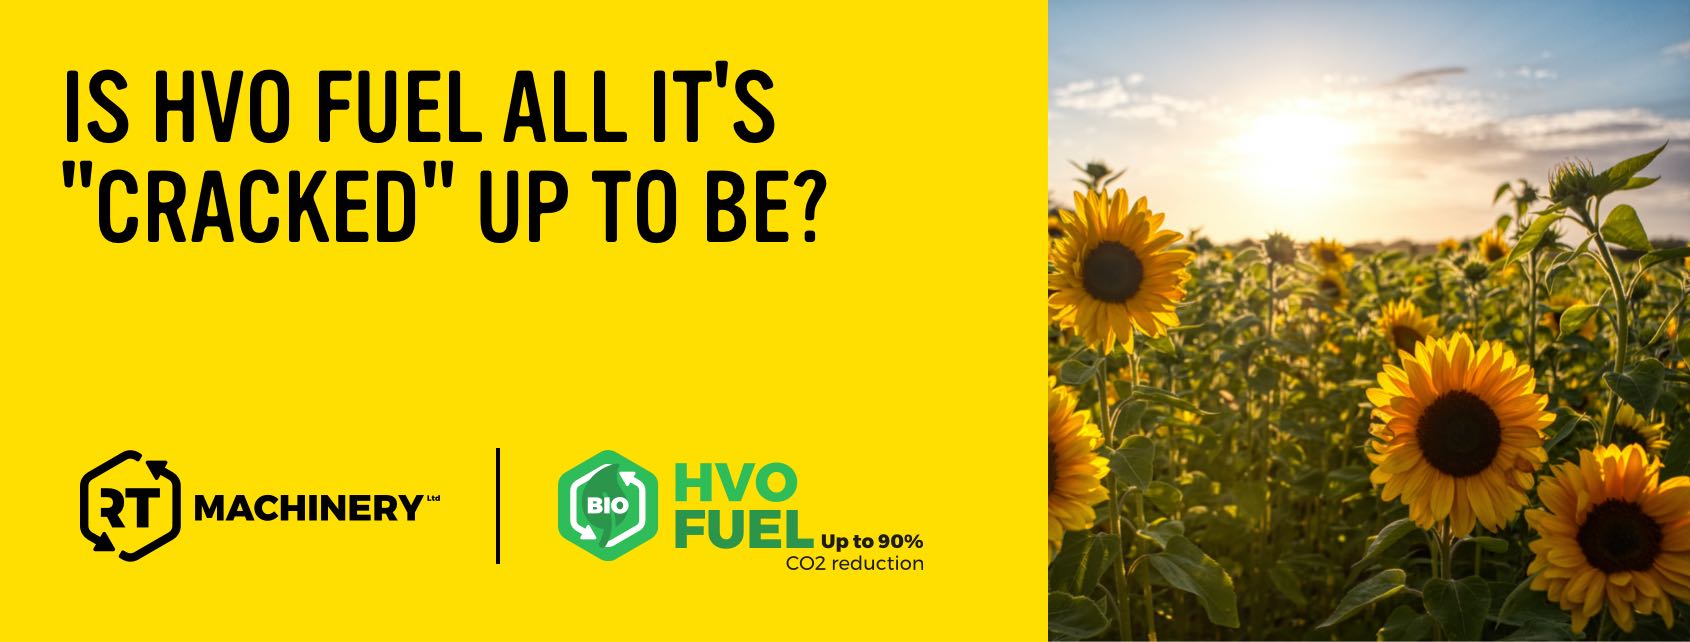 Is HVO fuel all it's cracked up to be?